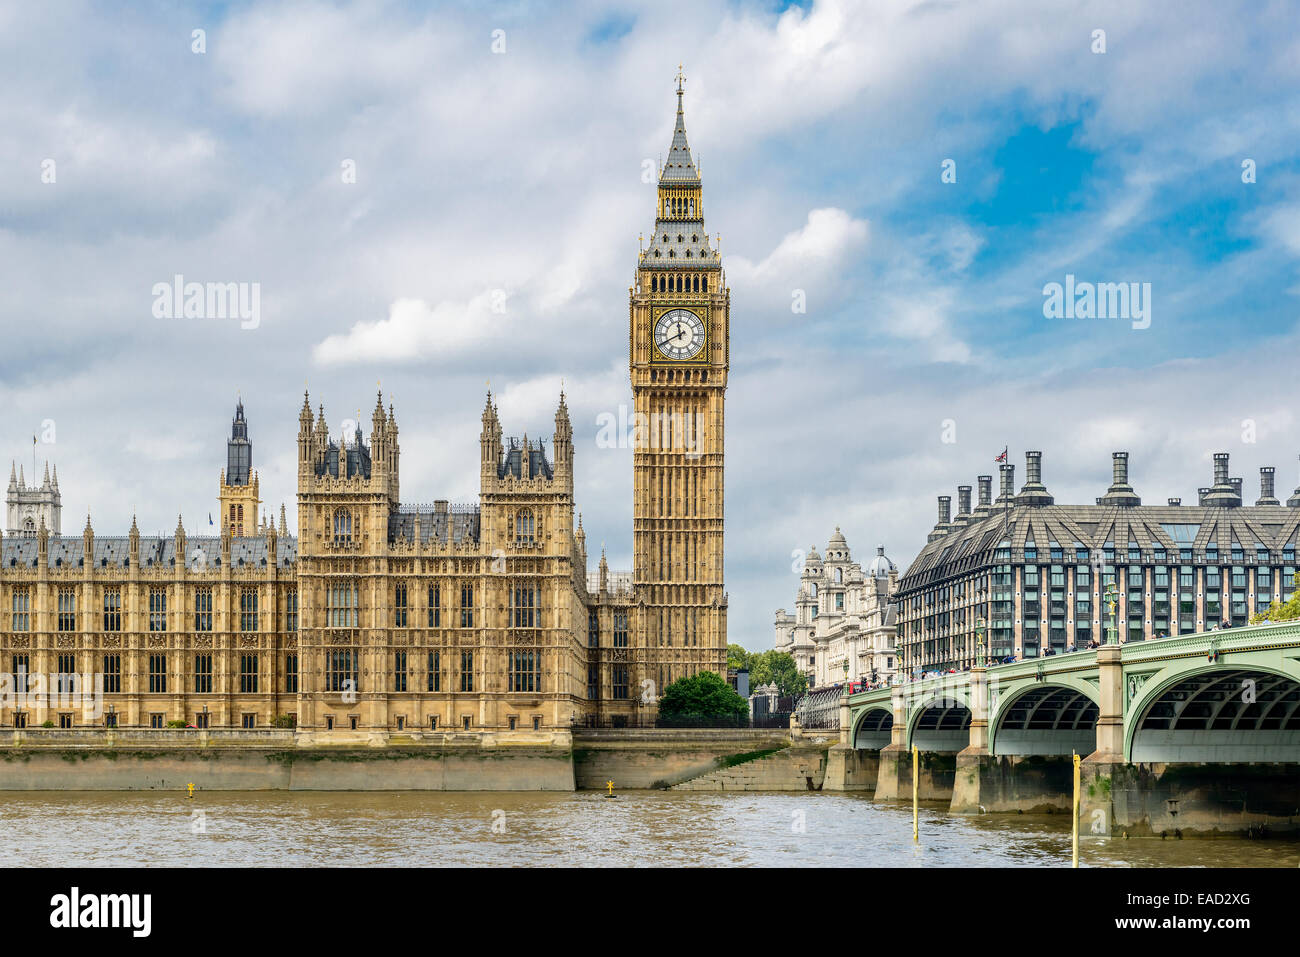 LONDON - AUGUST 27, 2014: Tourists cross the Westminster Bridge in front of the Big Ben and Houses of Parliament Stock Photo